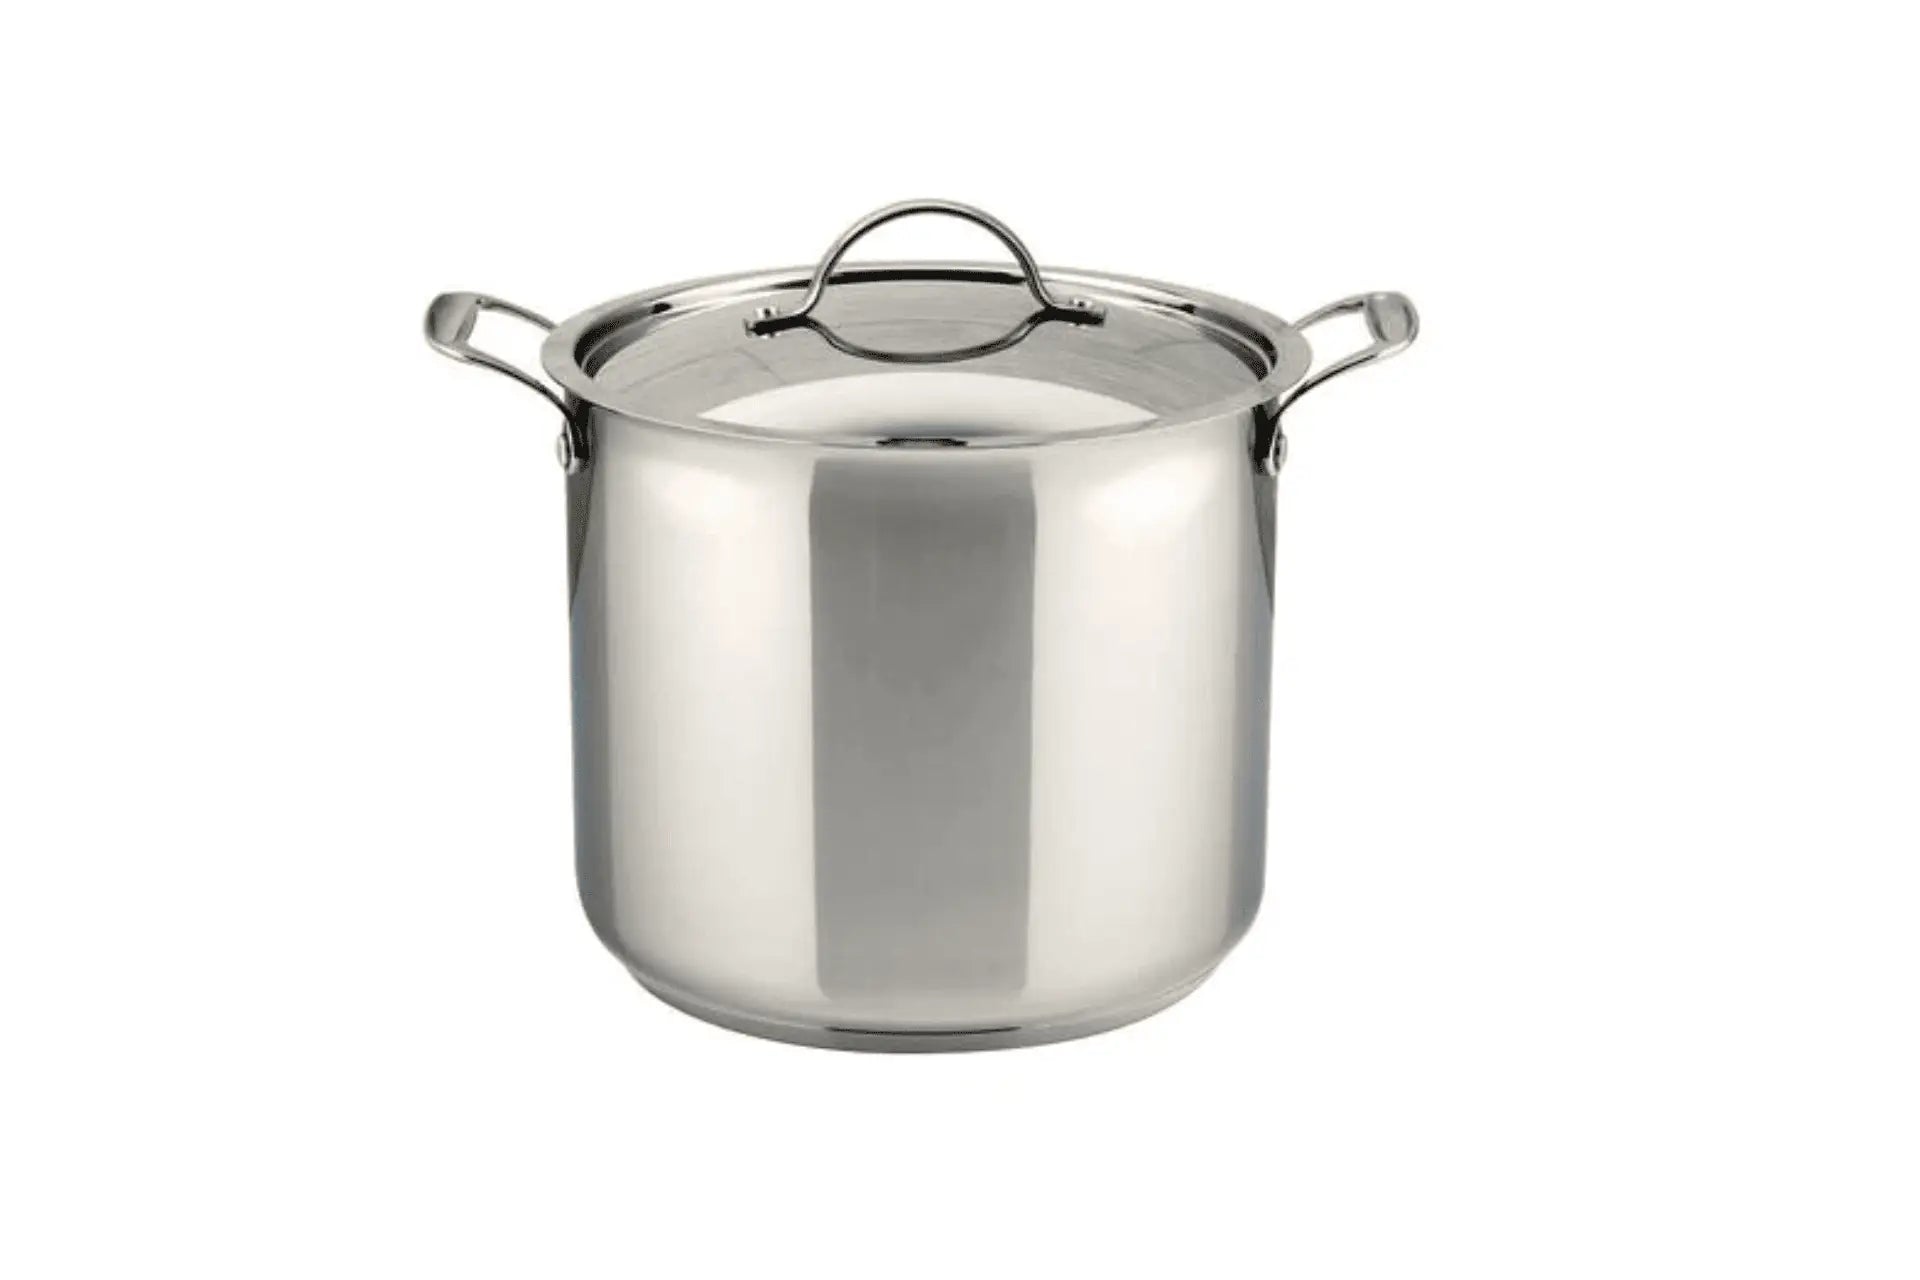 Meyer Confederation stainless steel cookware 14L Stockpot